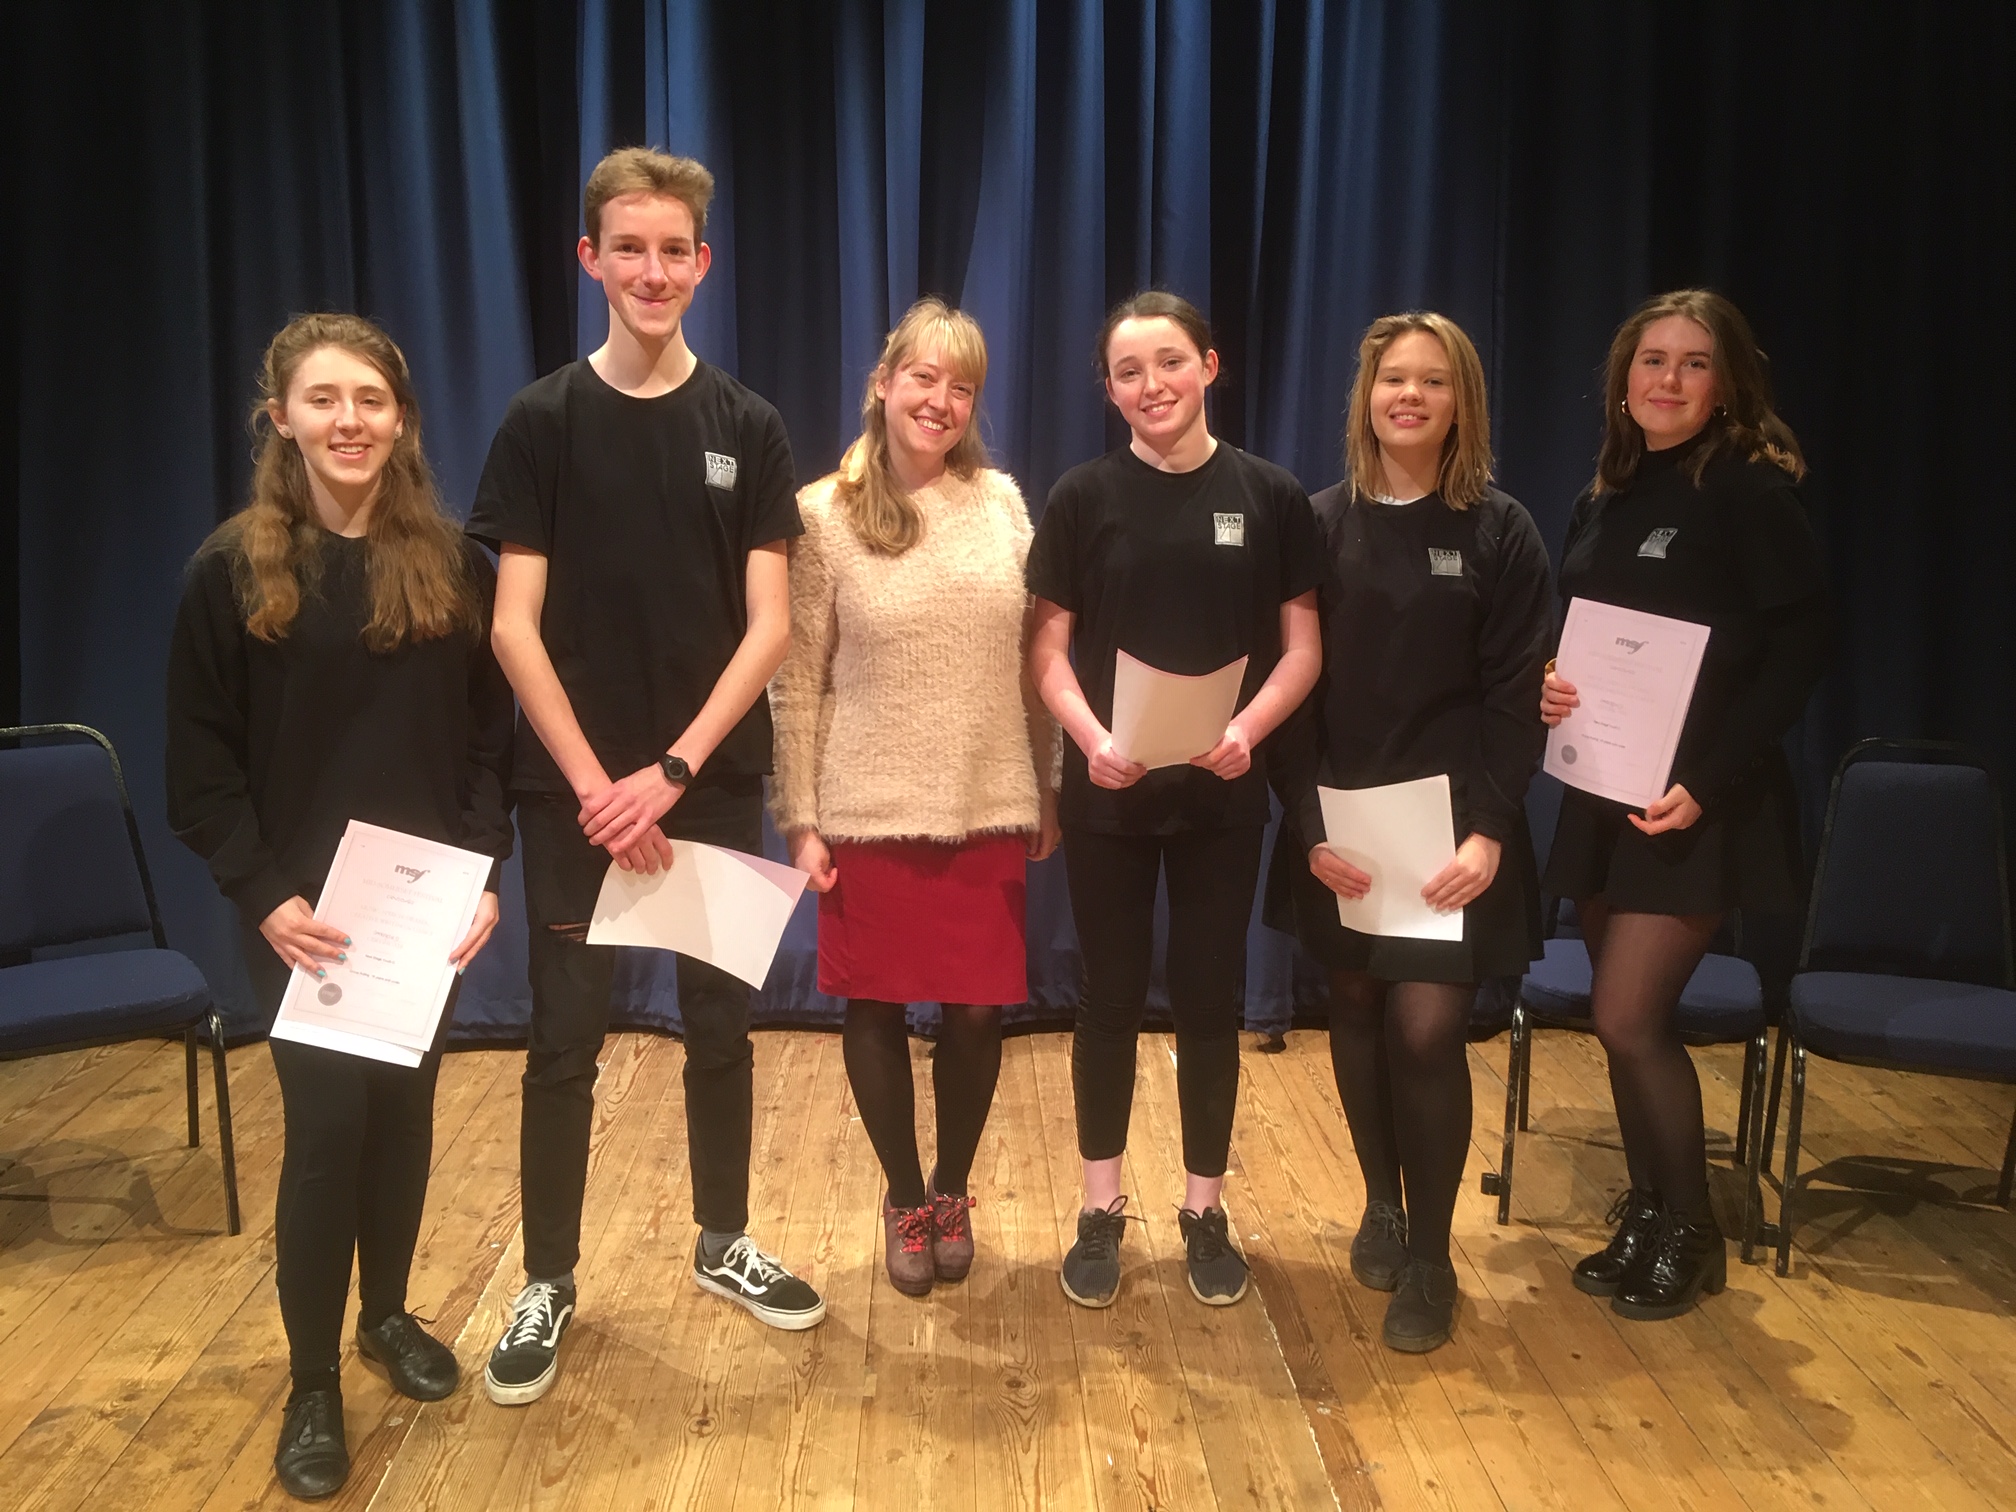 Next Stage Youth Senior Group C - Ysobel Andrew, Henry Skinner, Keira Barry, Jazmine Vale, Isabella Fenton with NSY Tutor Hayley Fitton-Cook